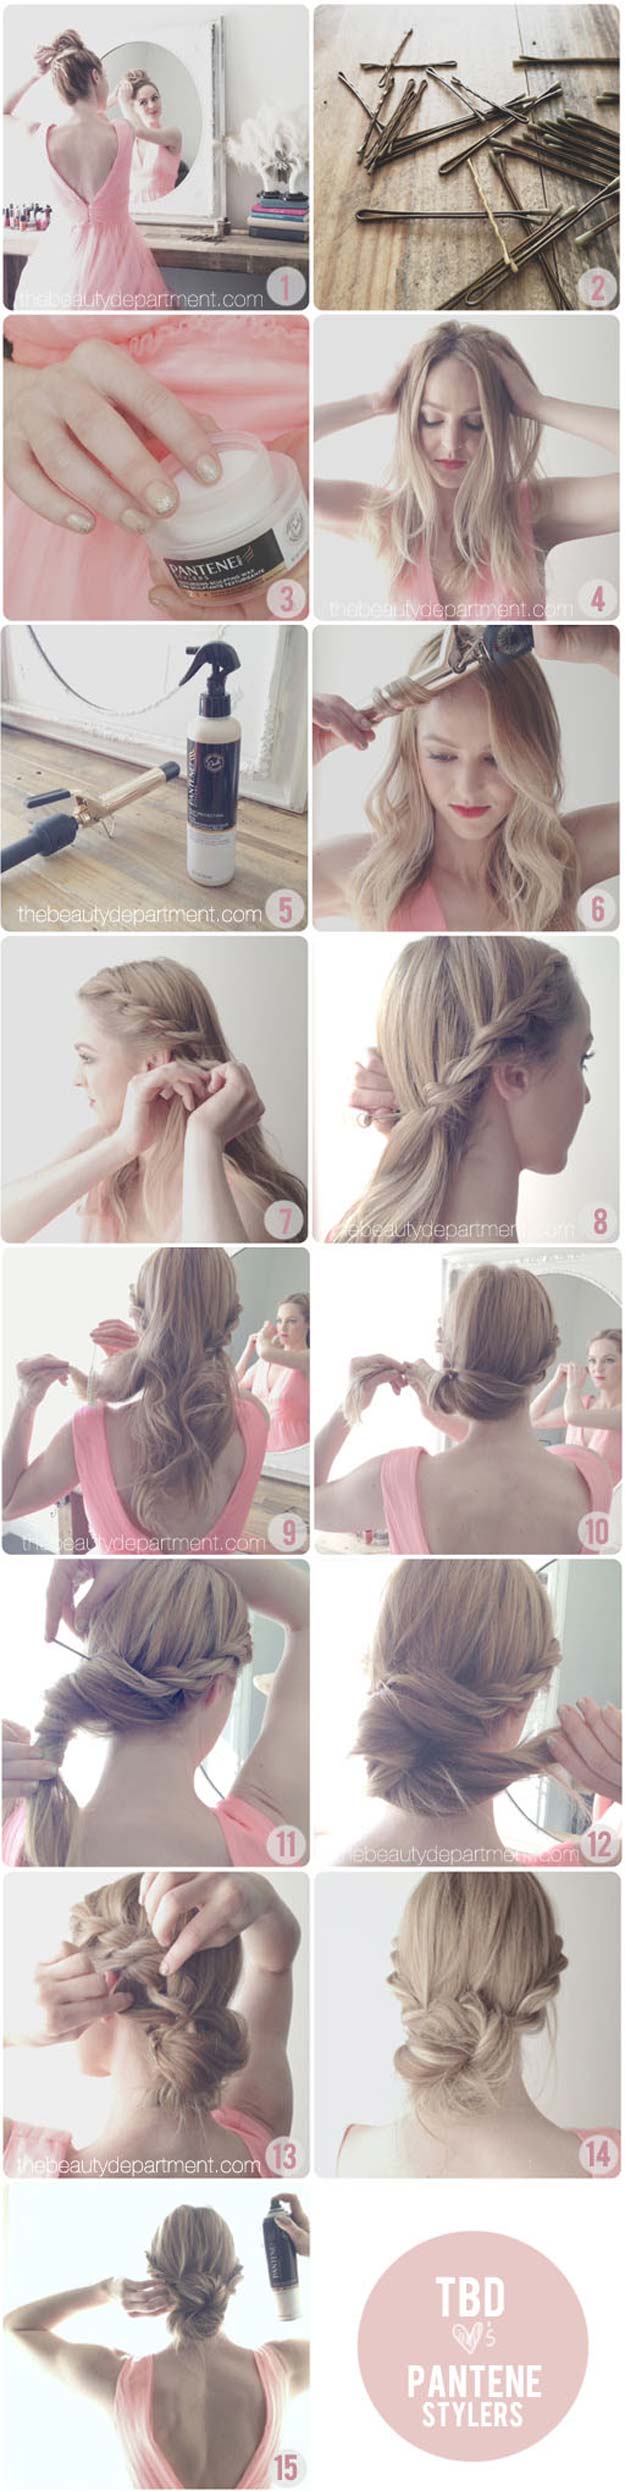 Best Hair Braiding Tutorials - Rop Braid Chignon - Easy Step by Step Tutorials for Braids - How To Braid Fishtail, French Braids, Flower Crown, Side Braids, Cornrows, Updos - Cool Braided Hairstyles for Girls, Teens and Women - School, Day and Evening, Boho, Casual and Formal Looks #hairstyles #braiding #braidingtutorials #diyhair 